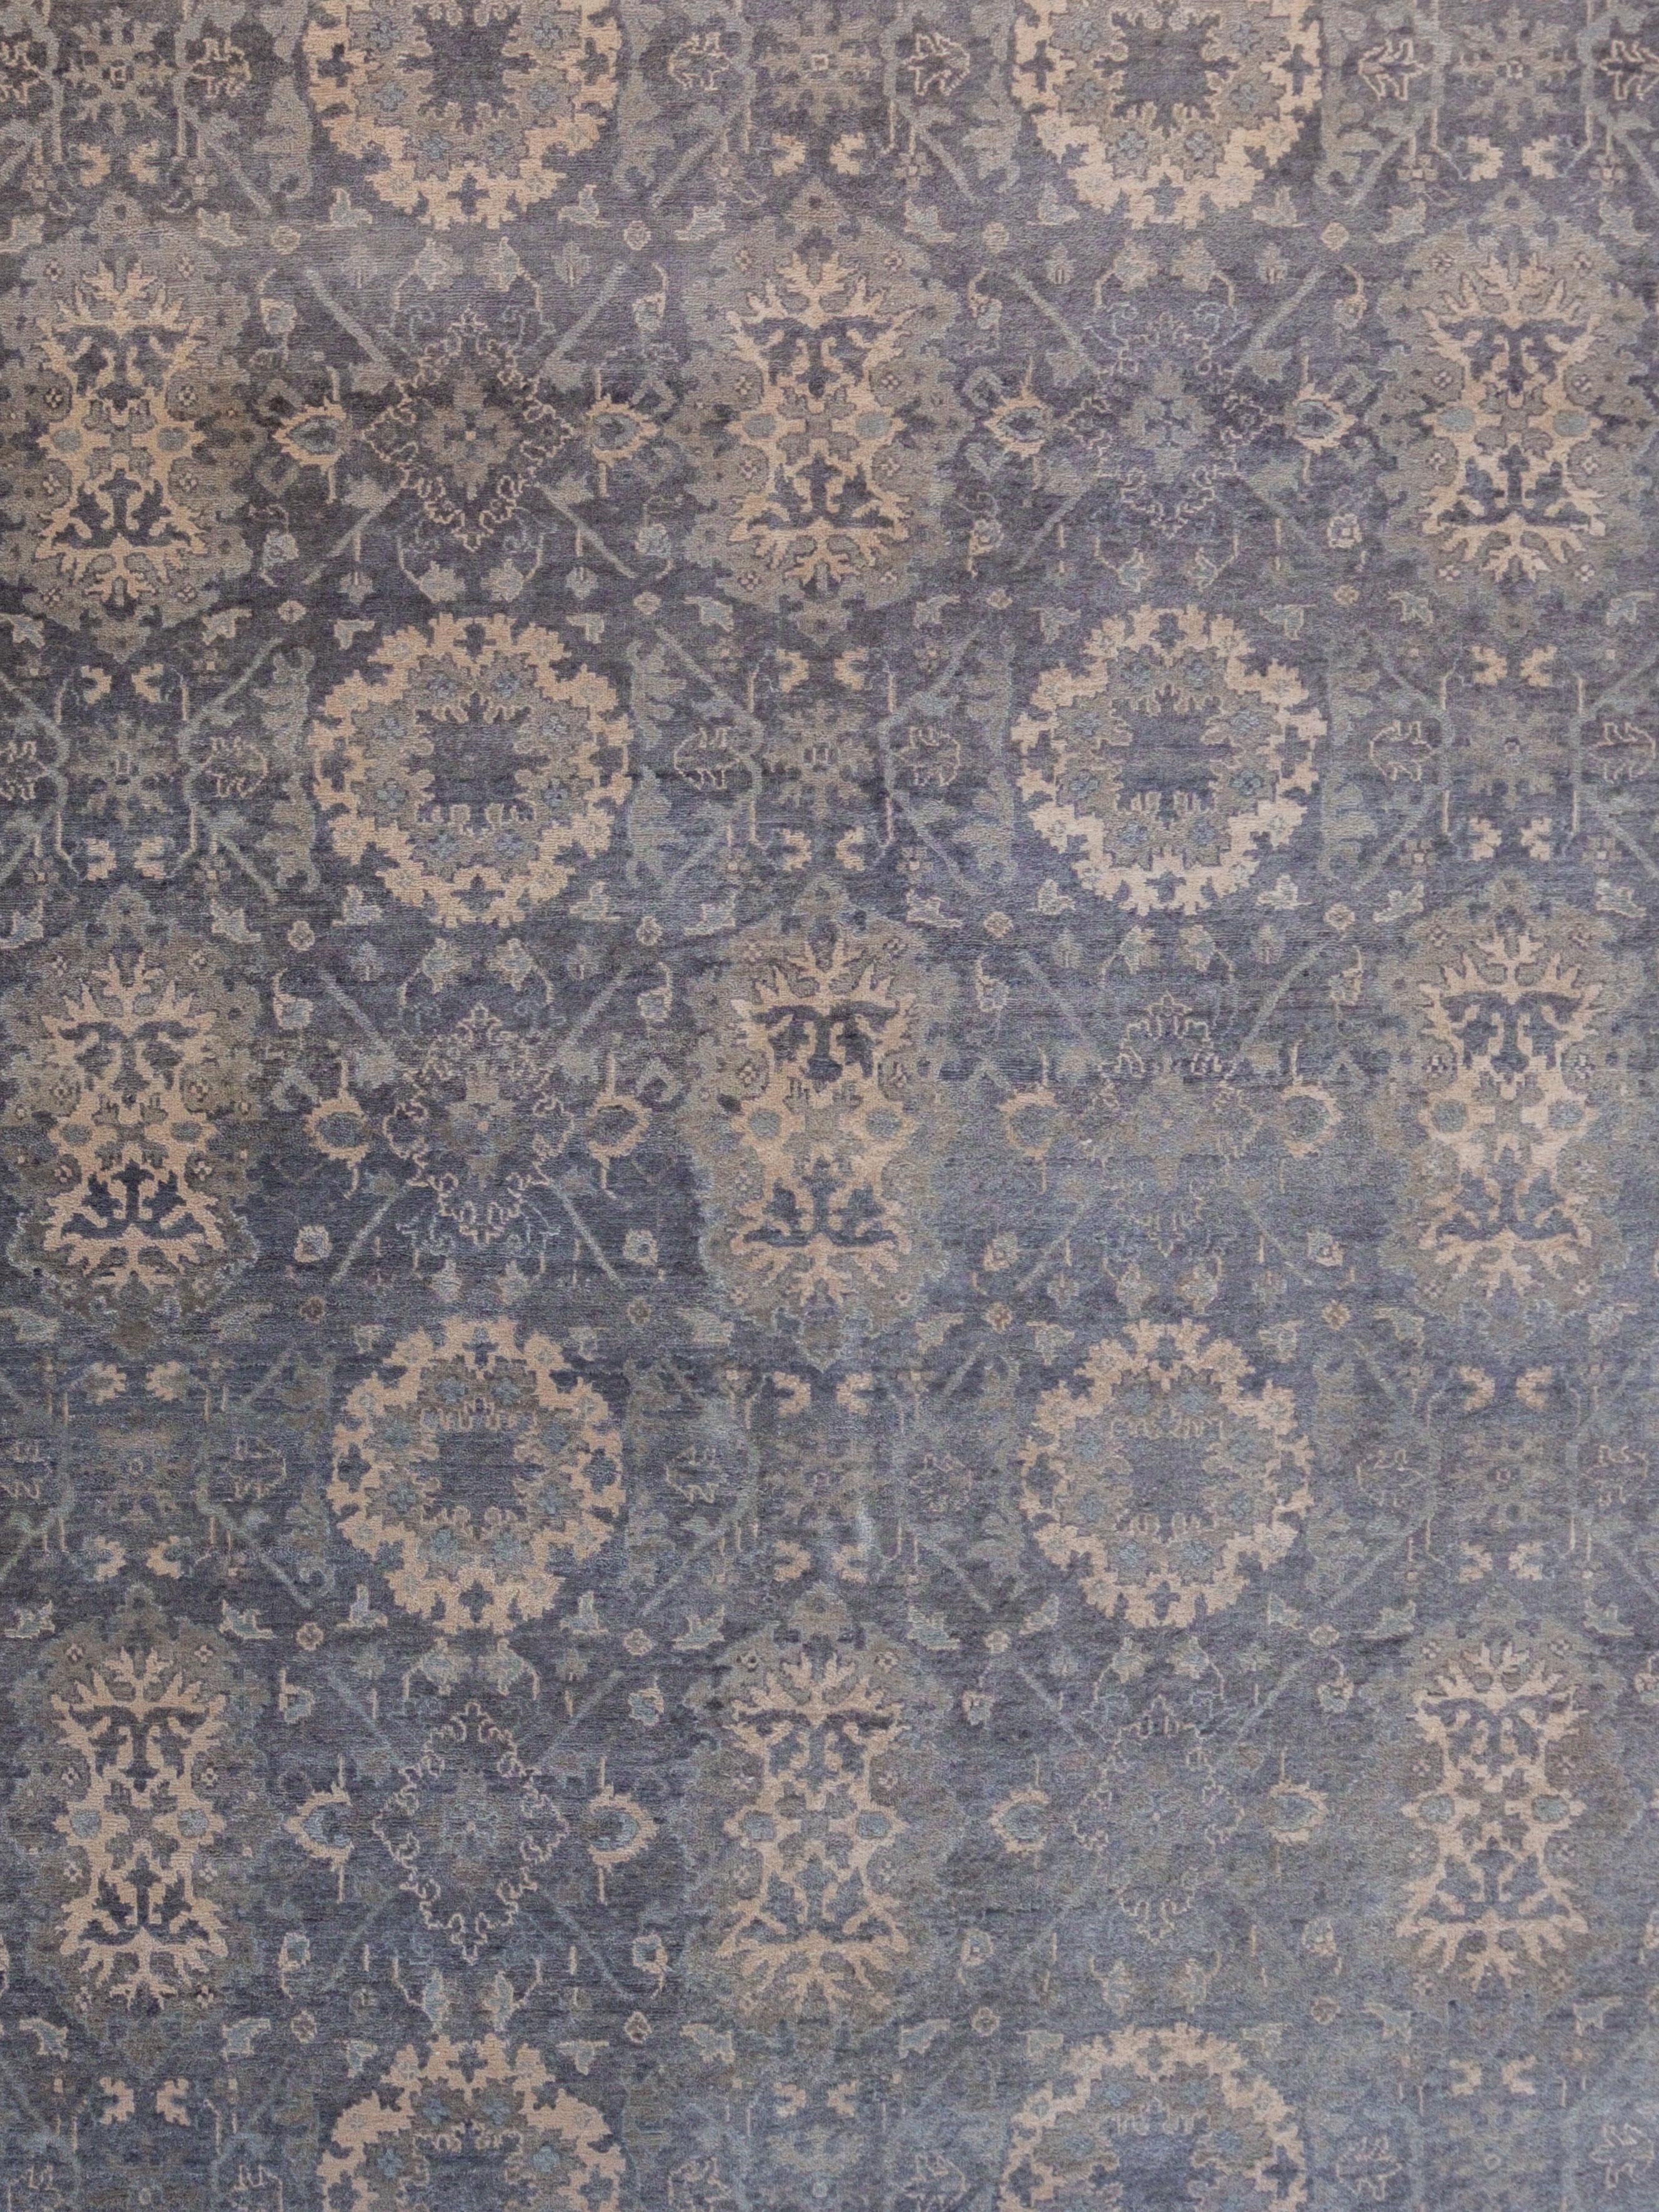 Adorned with interconnected floral motifs, this transitional wool carpet measures 8’10” x 11’11” and is hand-knotted using a traditional Persian weave. The carpet’s design depicts a blooming transitional flower garden, detailed with cream, gray, and